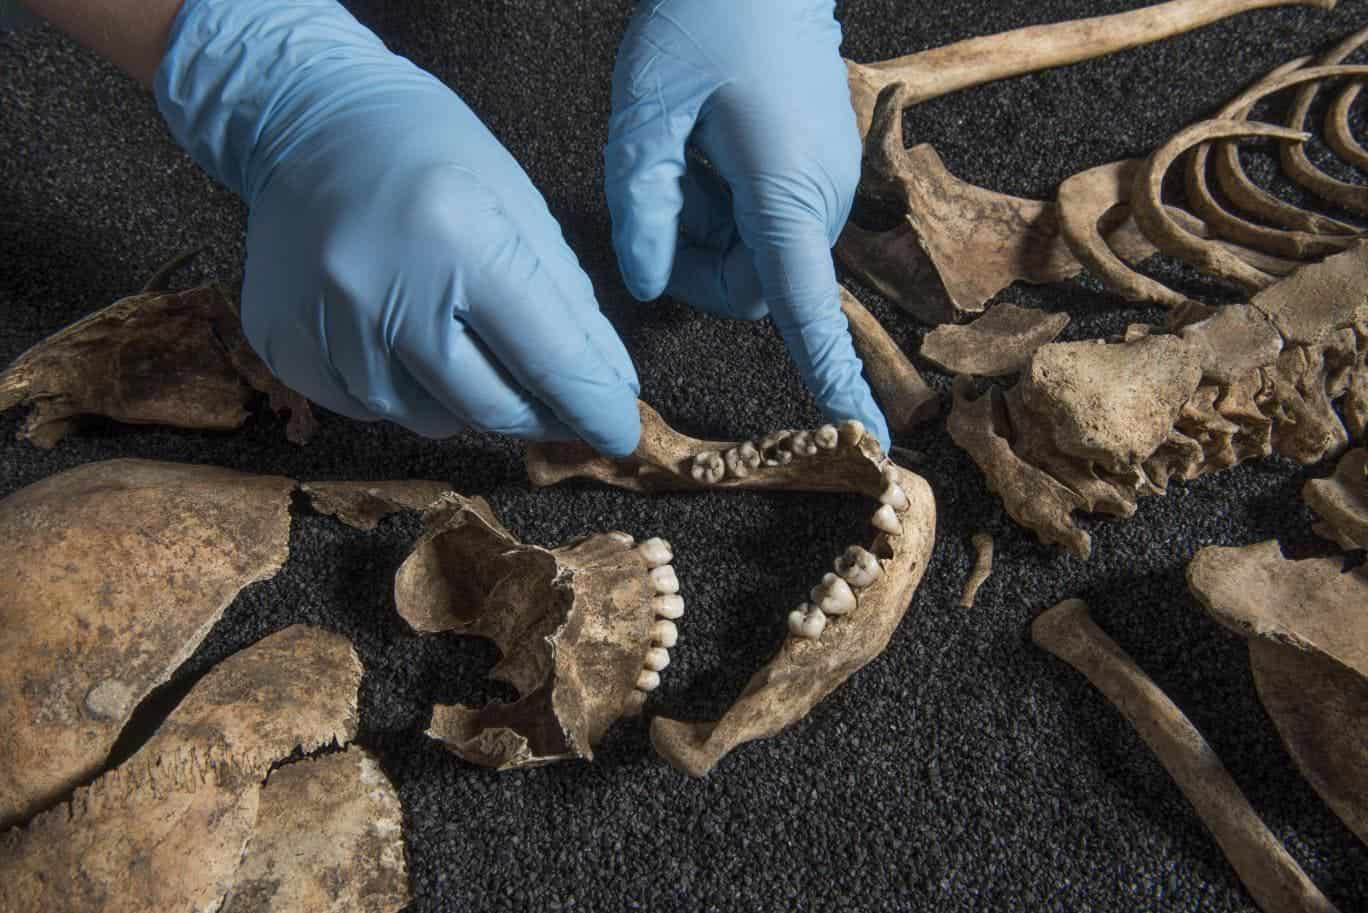 Part of the remains found in Southwark.
Image credits Museum of London.